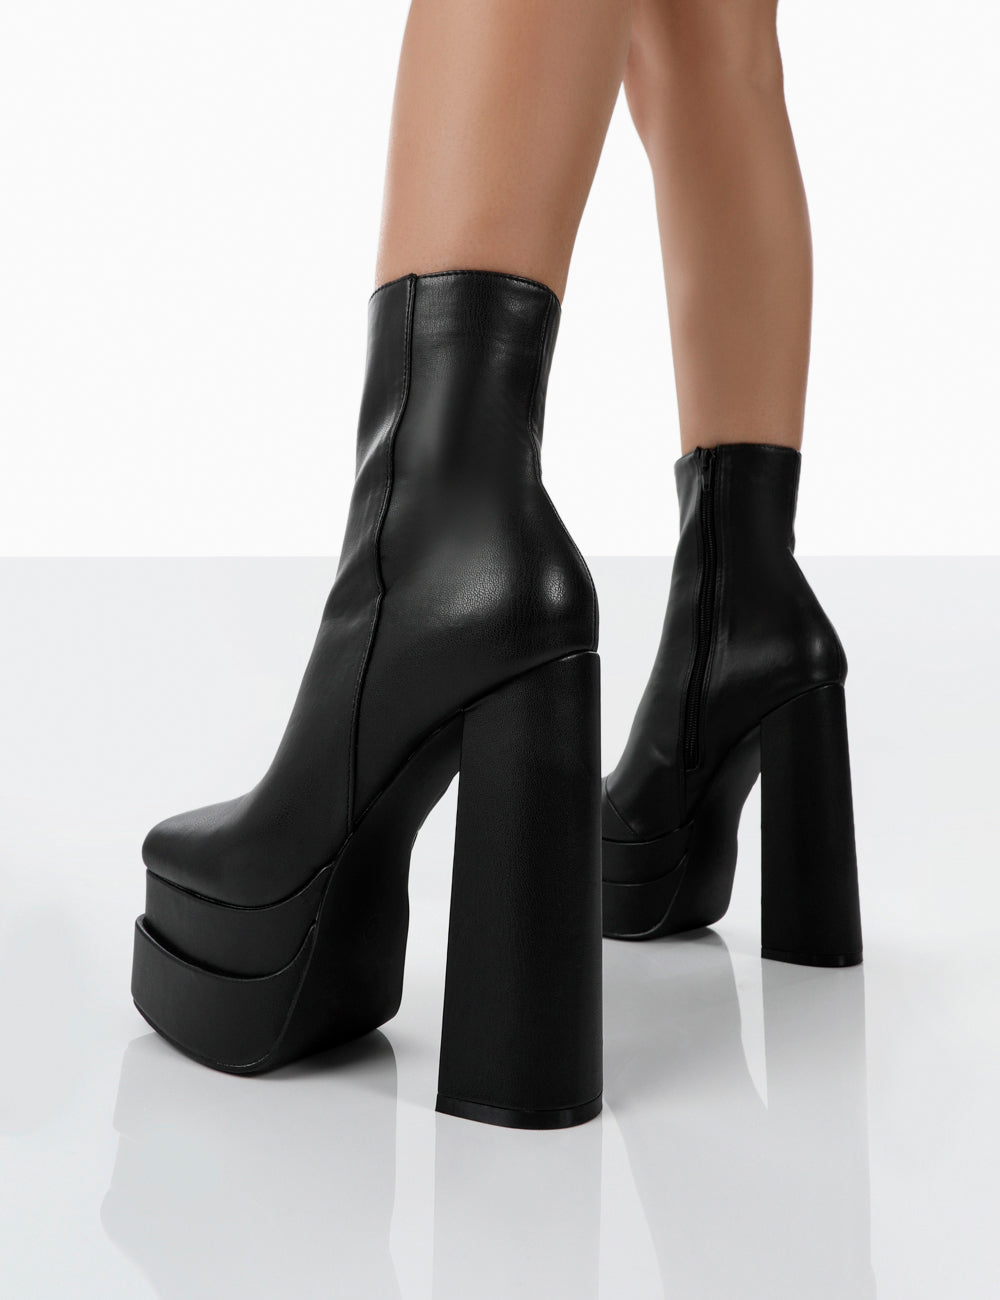 Karole Black Ankle Boots for Women - Fall/Winter collection - Camper USA